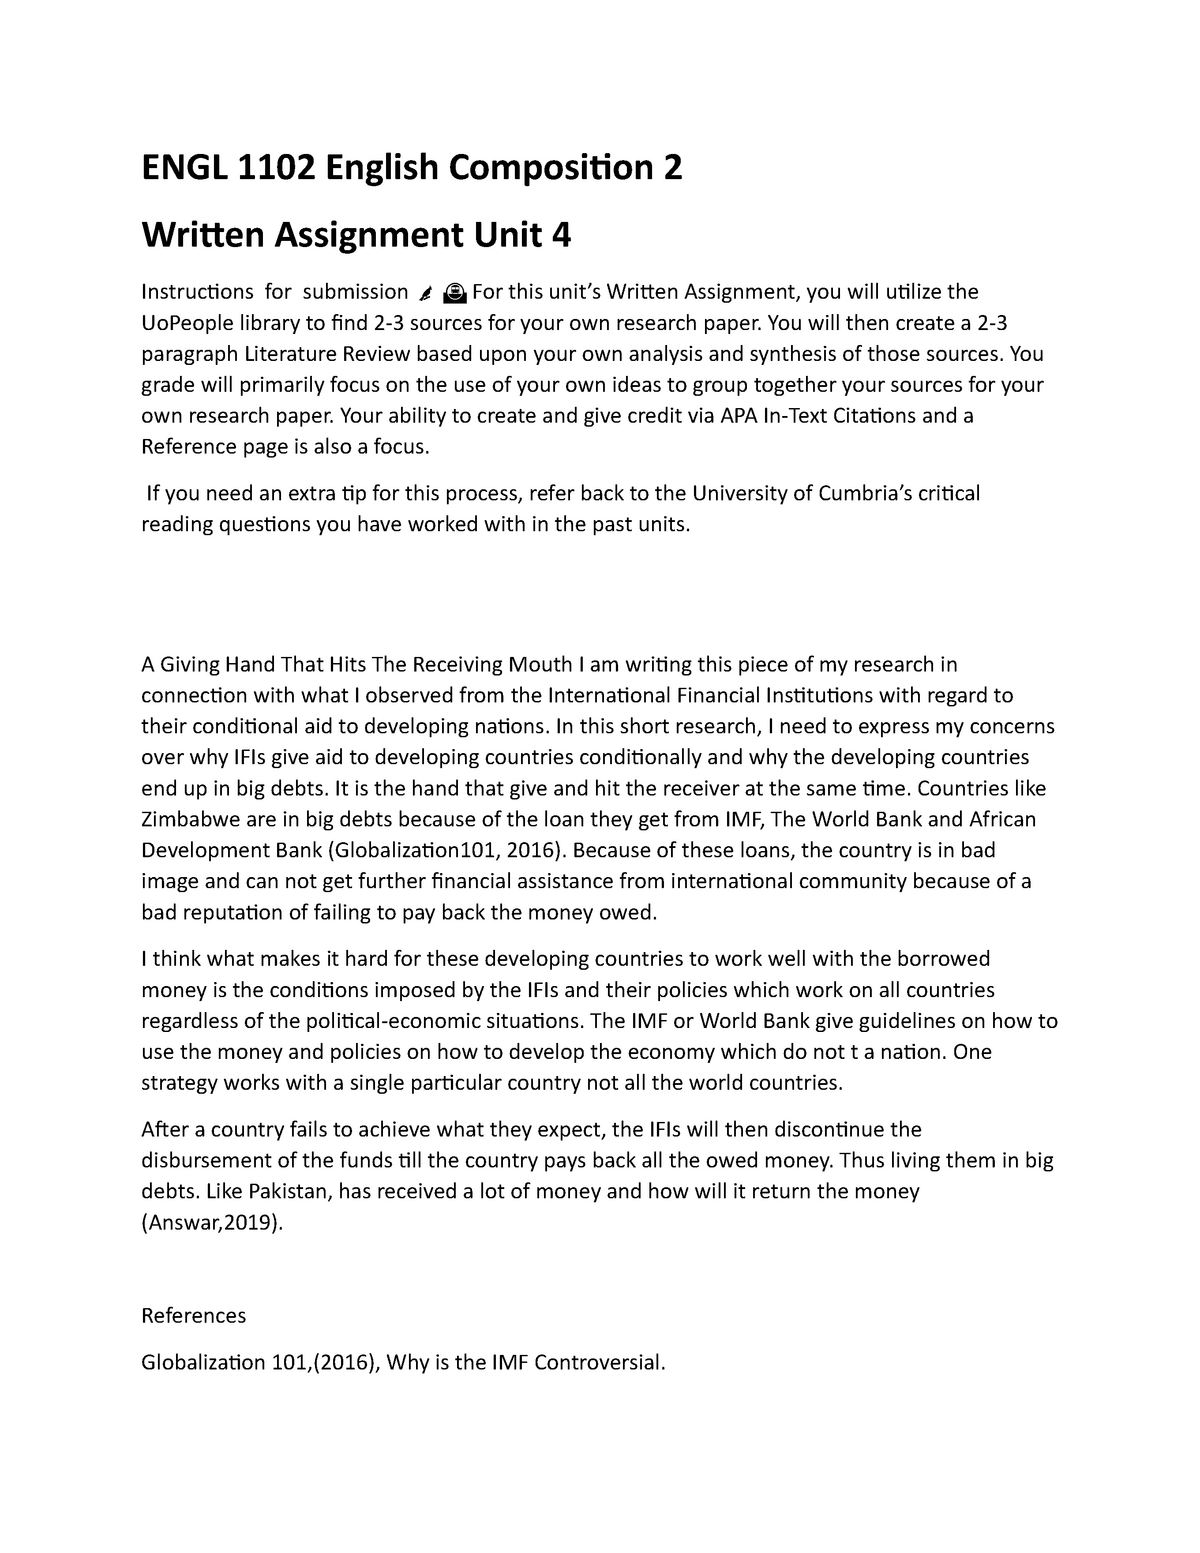 Document English Composition 2 ENGL 1102 UNIT 4 DISCUSSION ASSIGNMENT